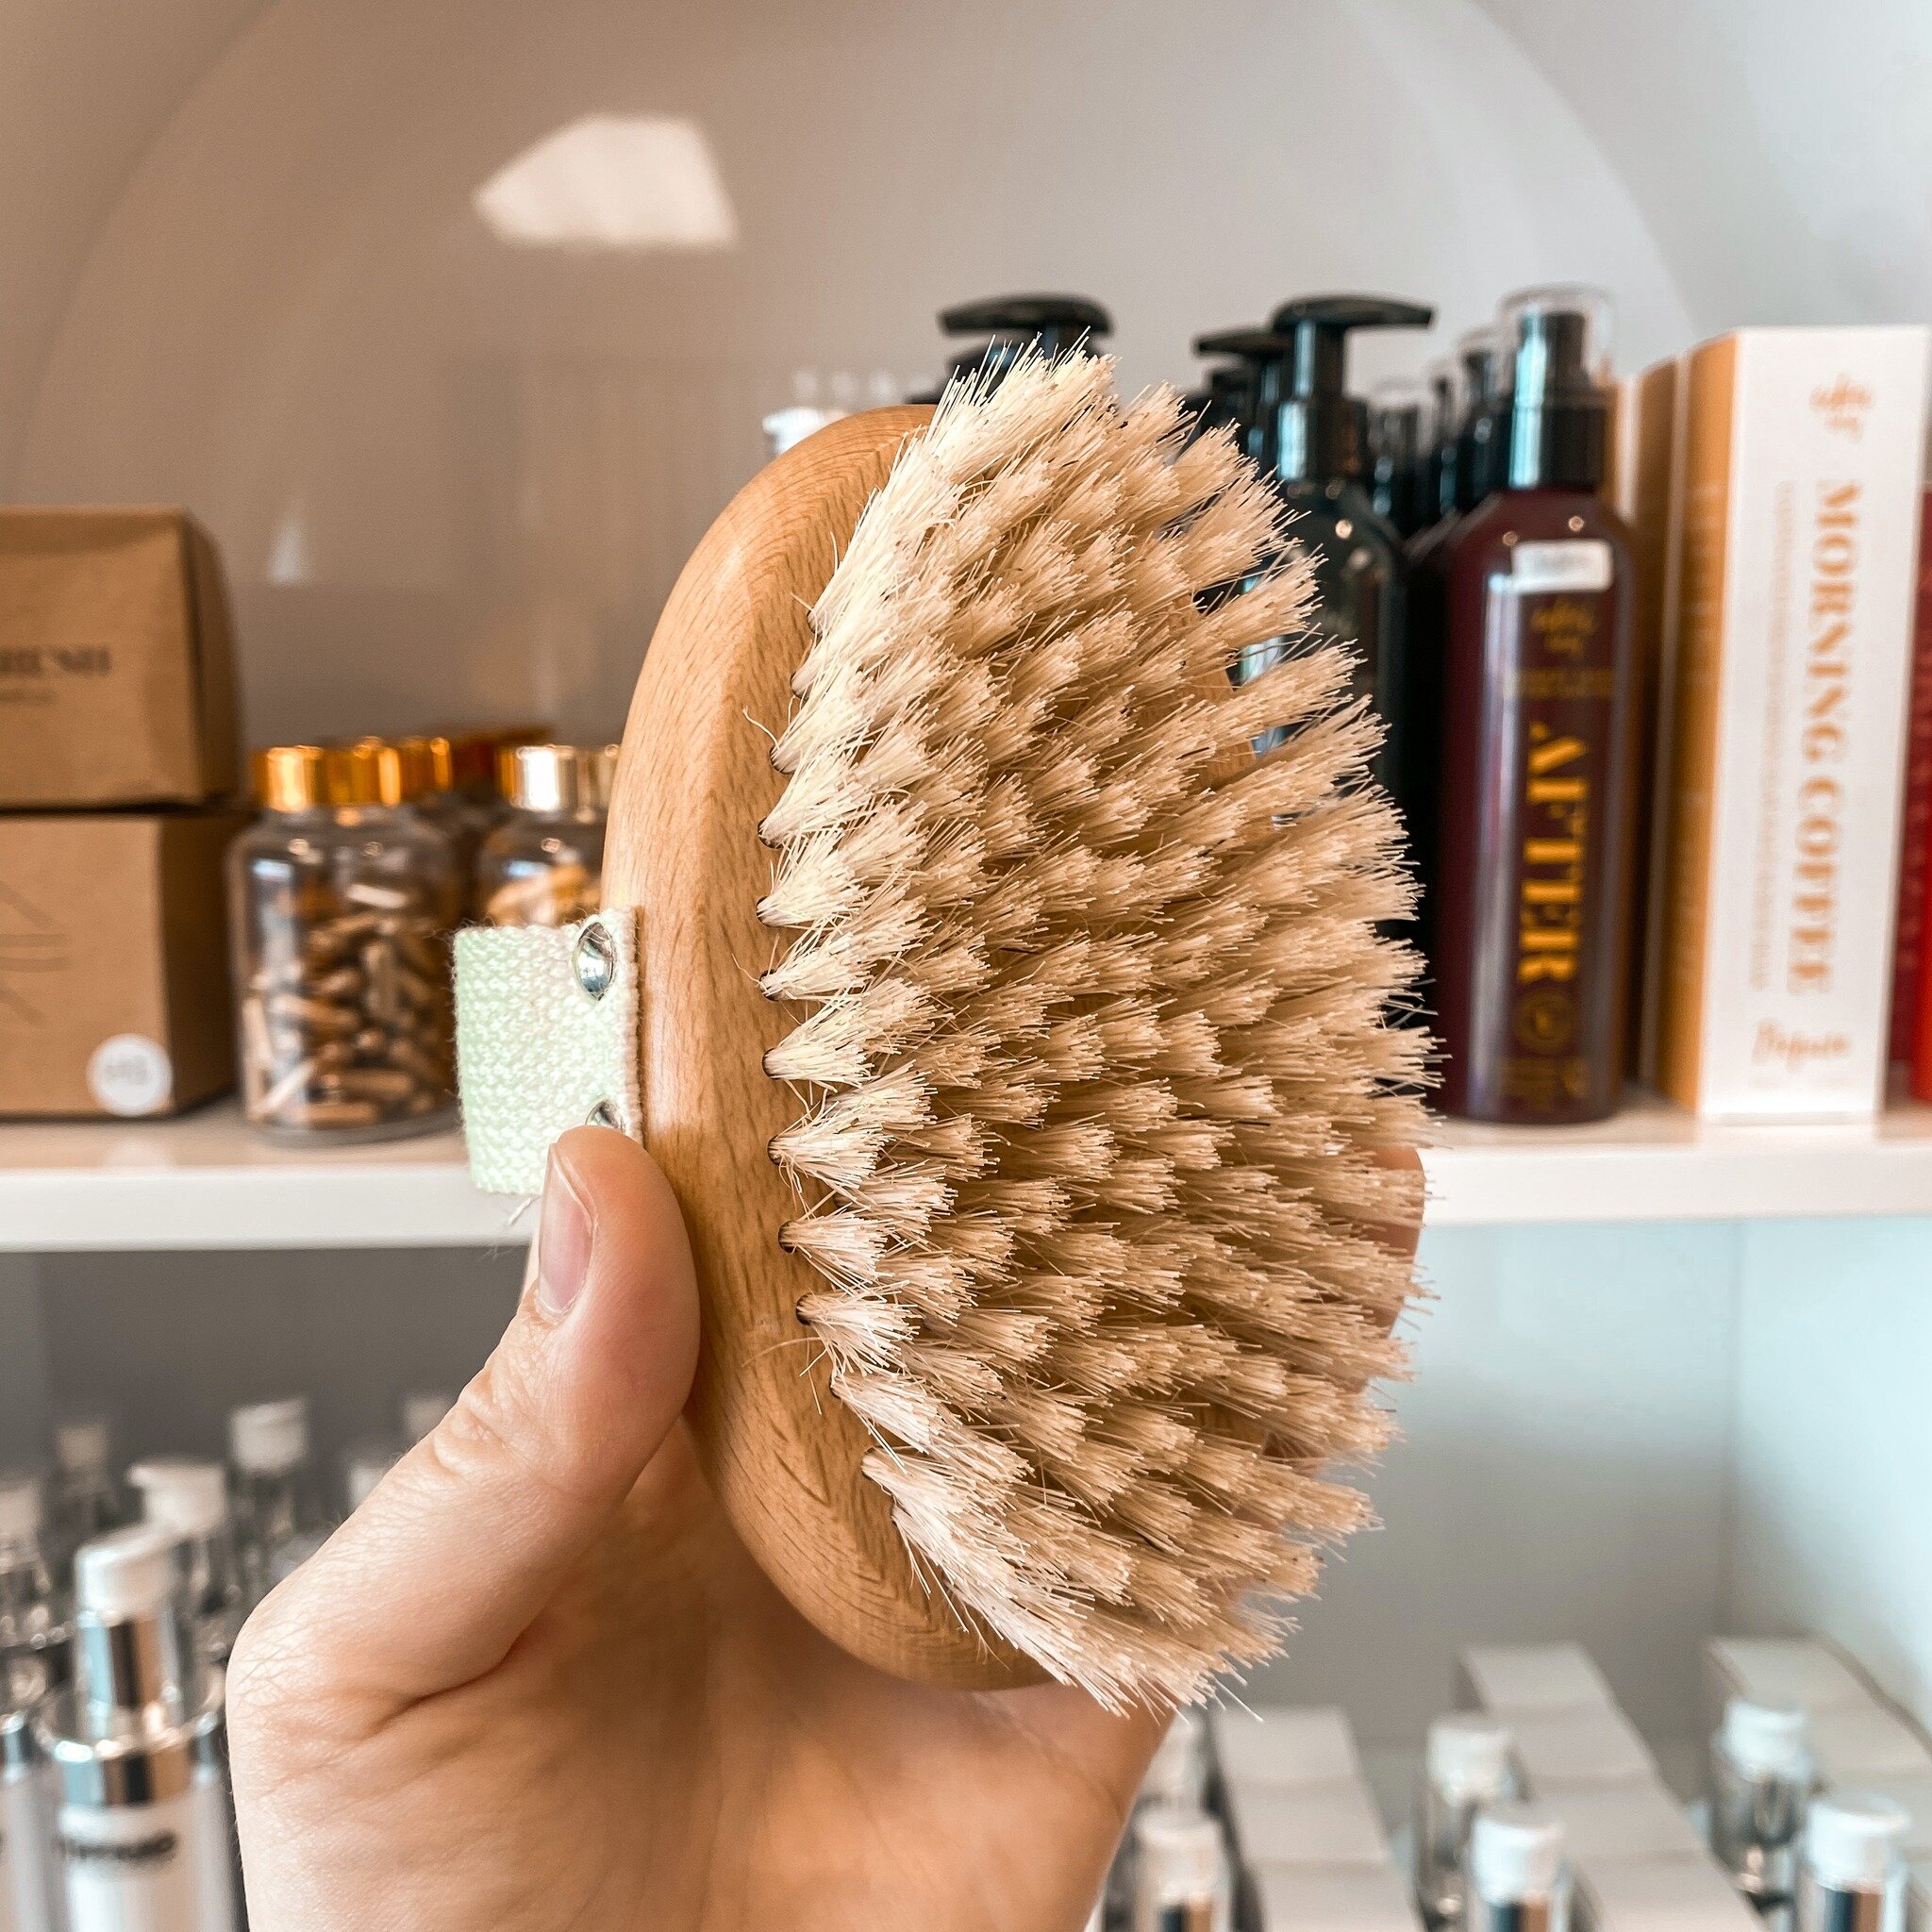 Why Dry Brush? Your lymphatic system uses your skin to help detox. As we age, our skin becomes less efficient at detoxing and less effective at naturally shedding our dead skin cells. That&rsquo;s where dry body brushing can help. Dry brushing is an 